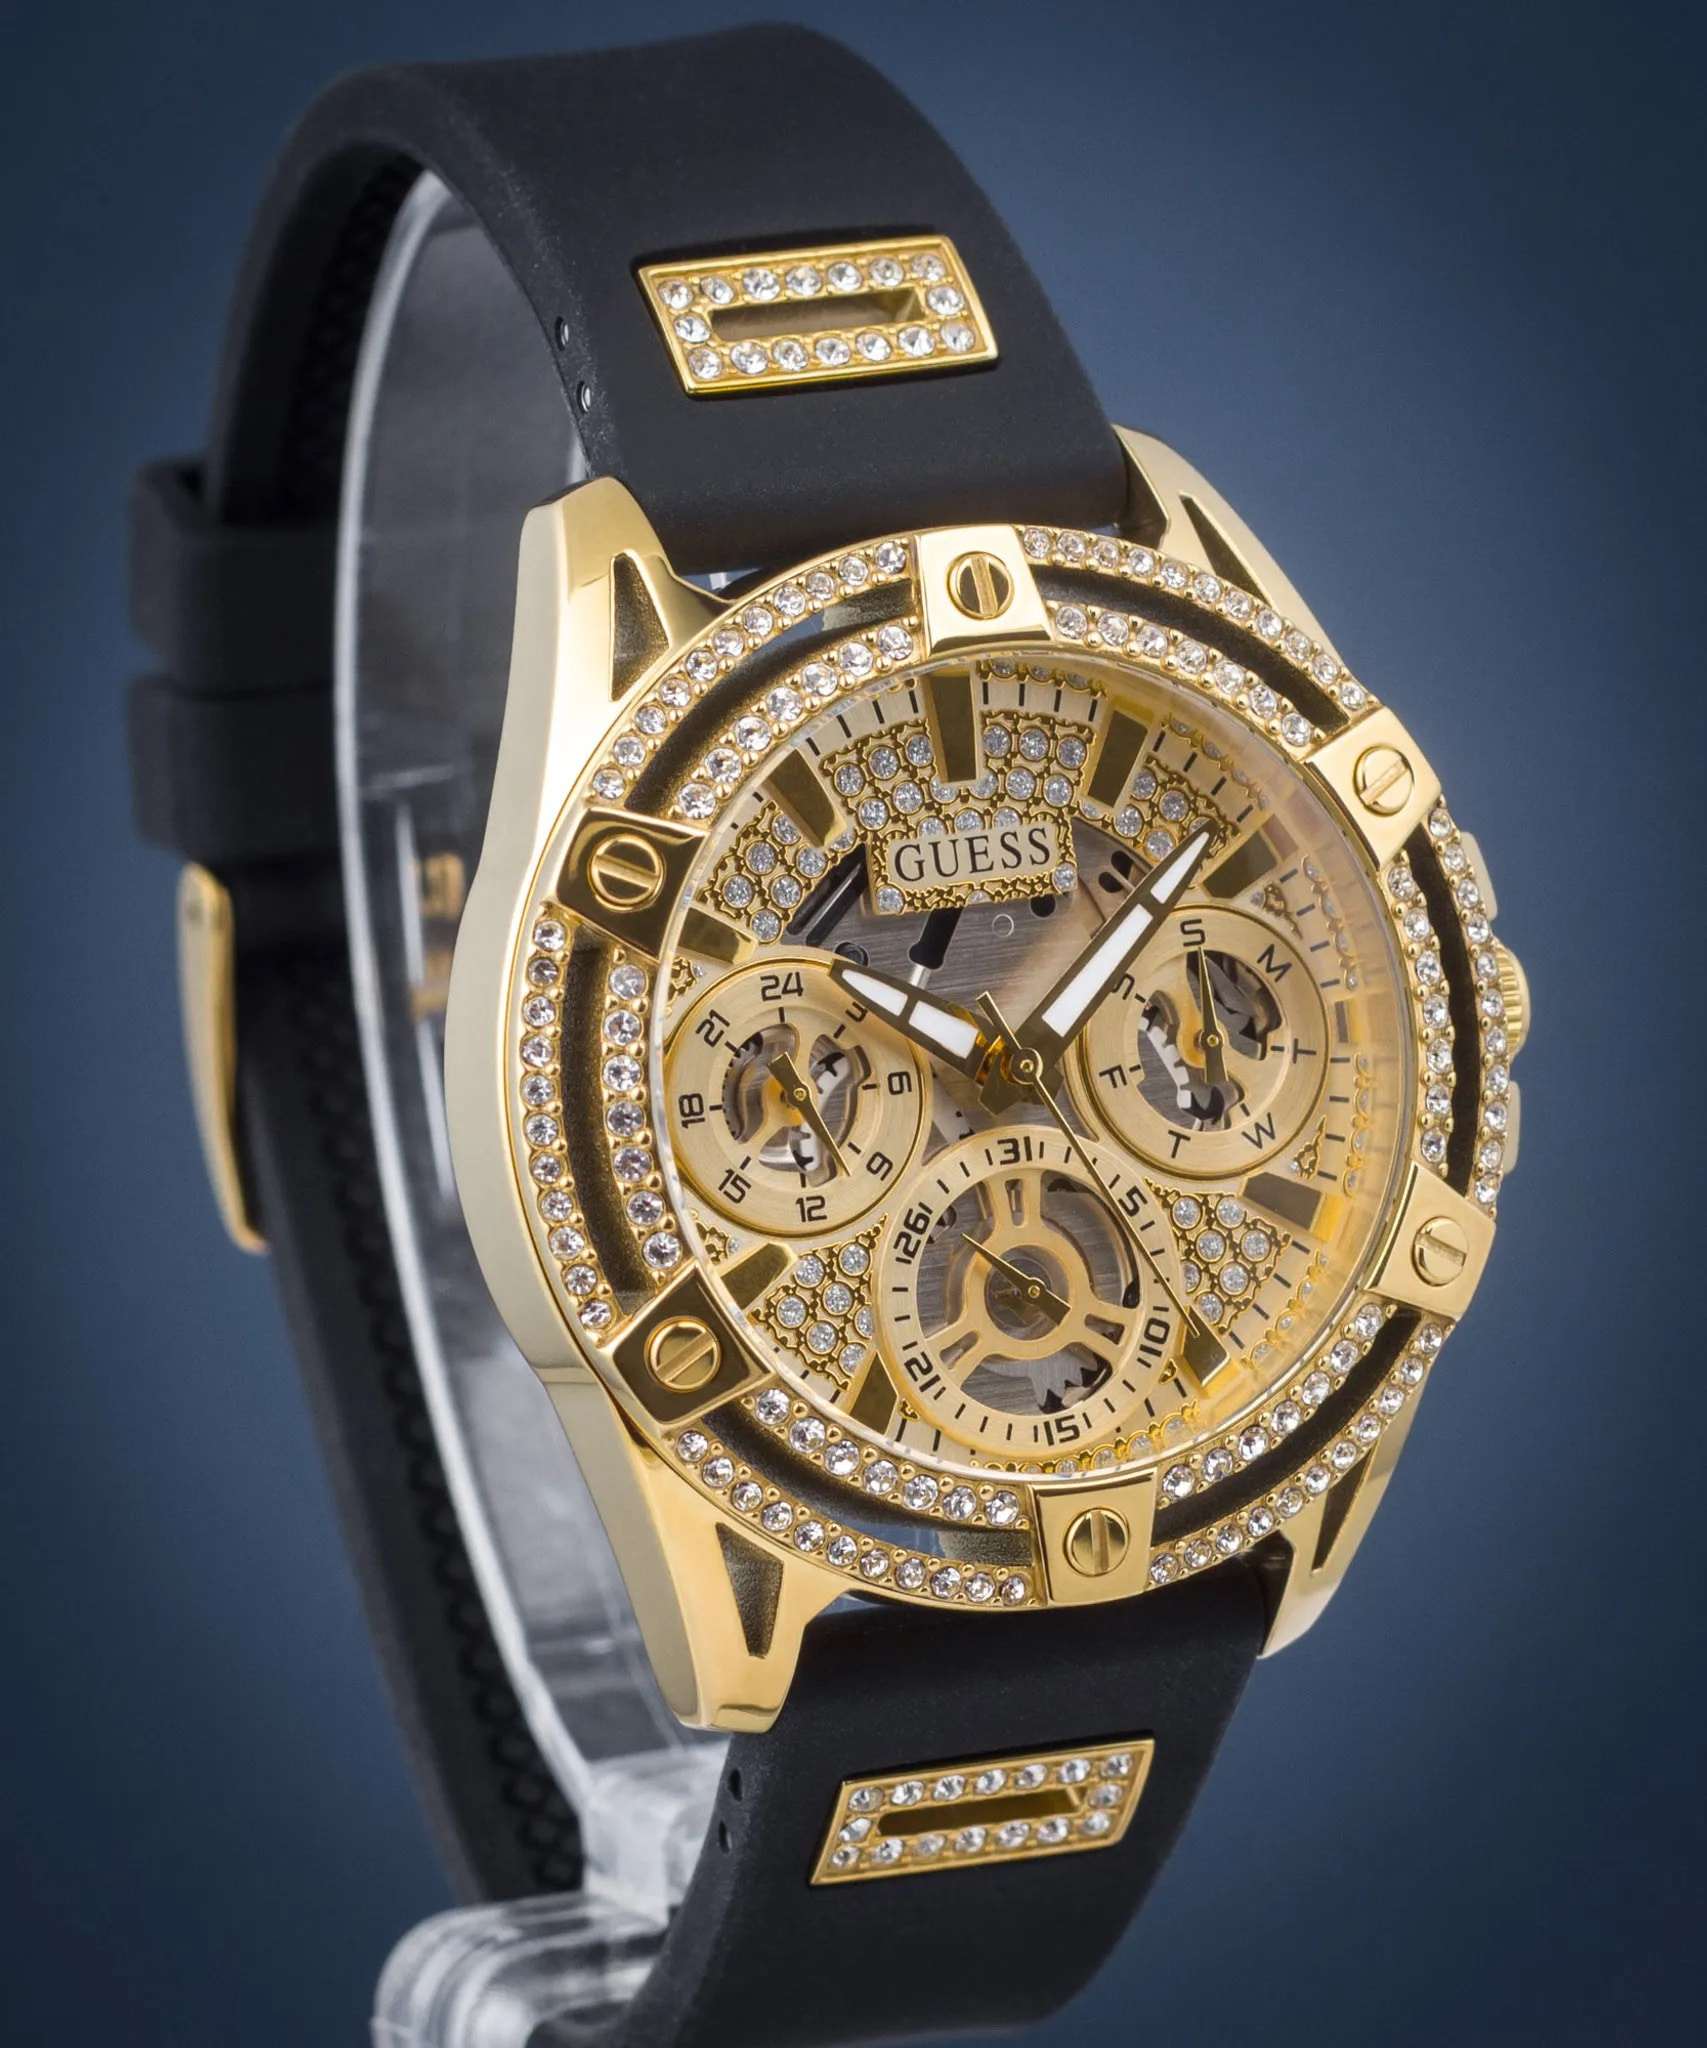 ĐỒNG HỒ GUESS GOLD-TONE MULTI-FUNCTION BLACK SILICONE WATCH GW0536L3 13